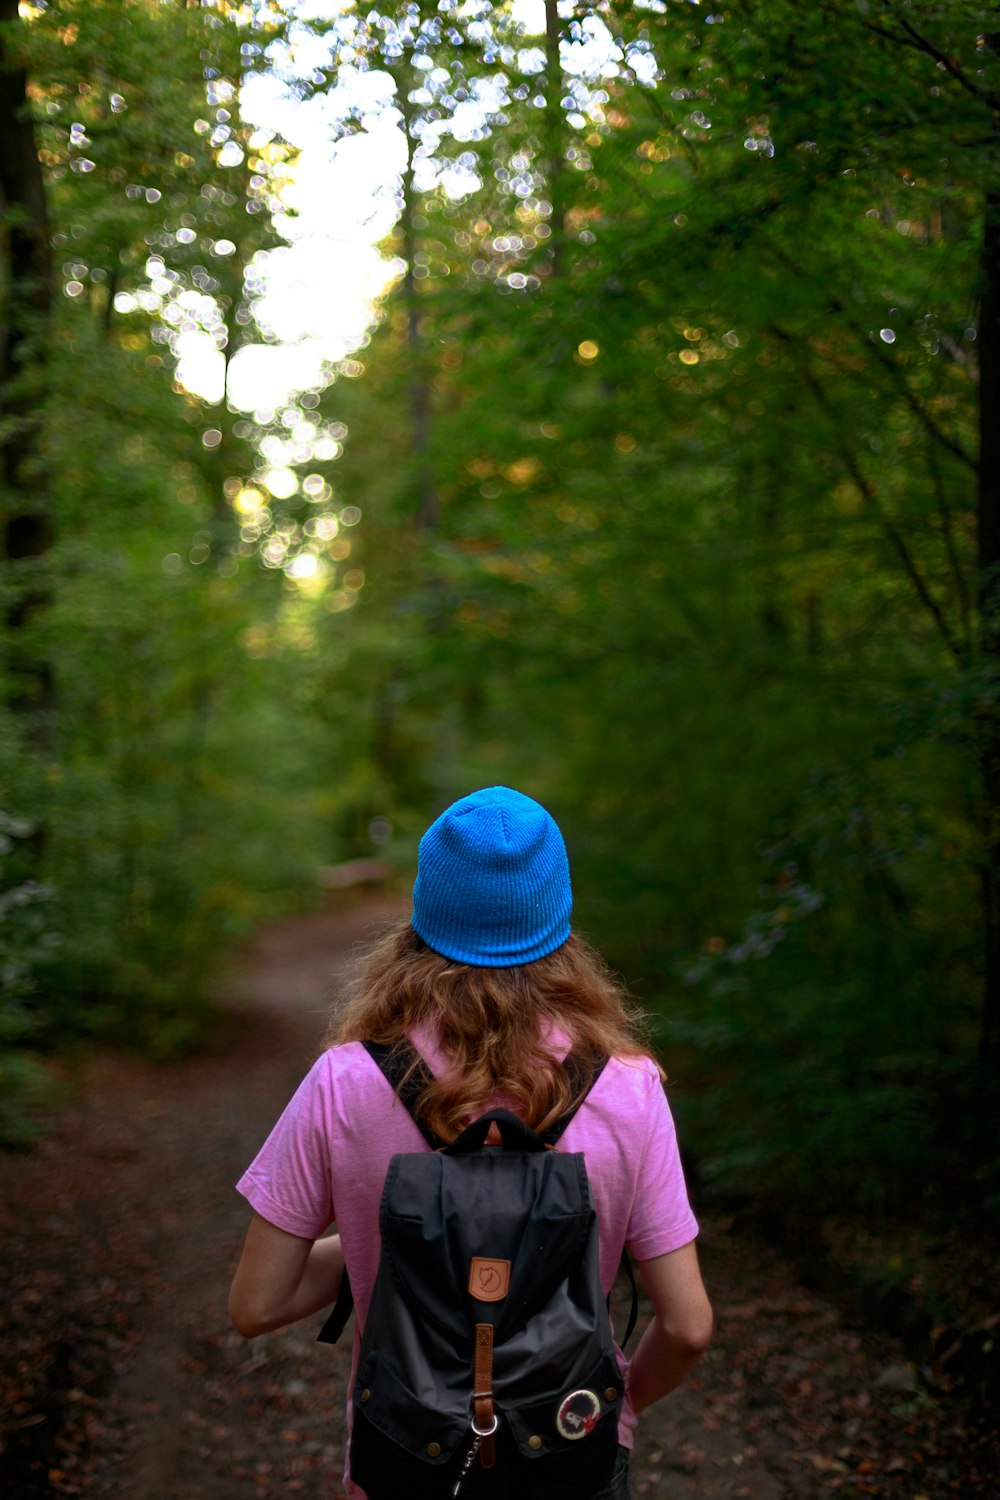 woman in pink long sleeve shirt and blue knit cap standing in forest during daytime